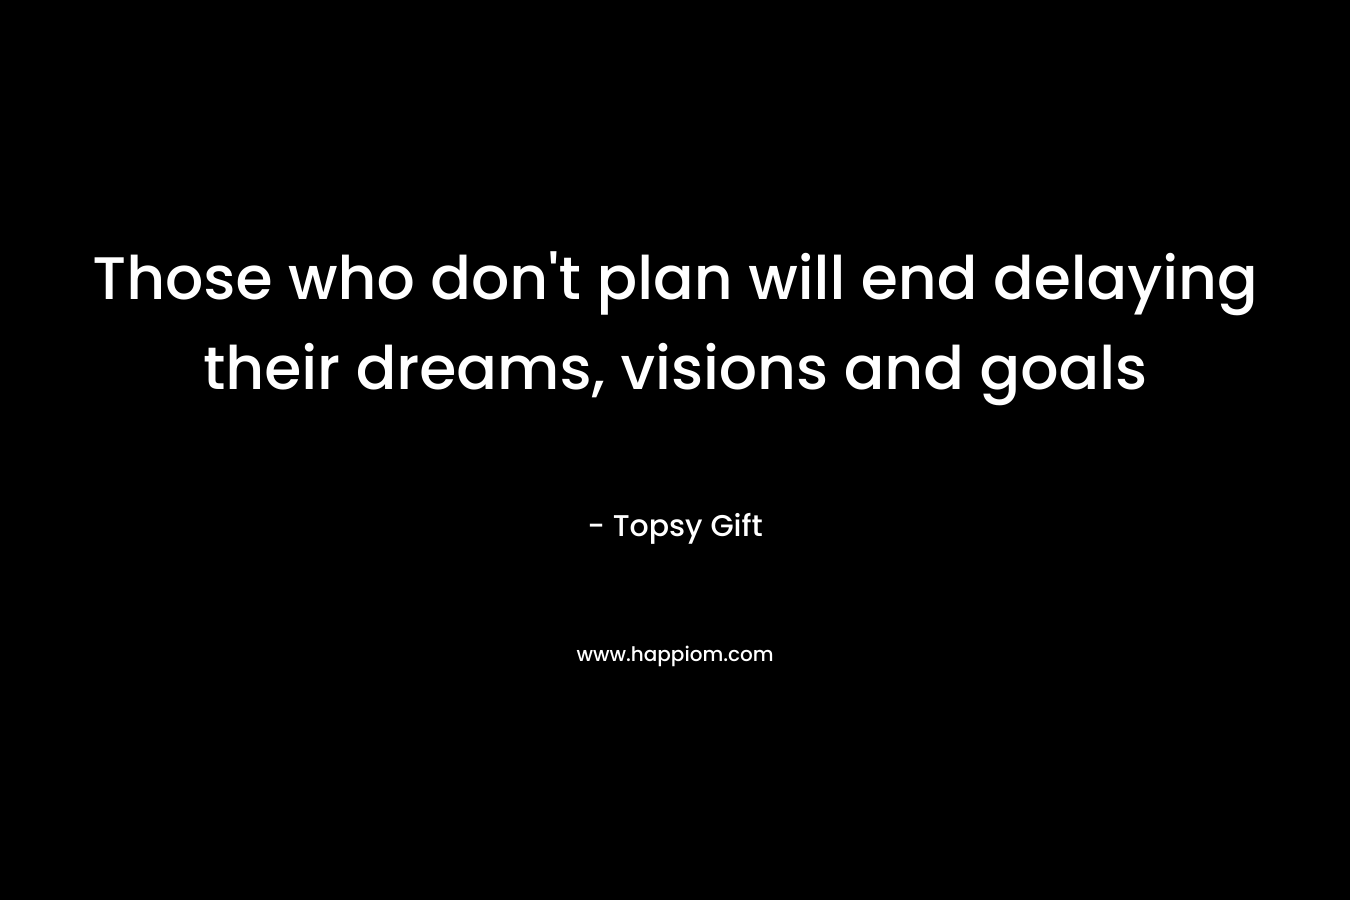 Those who don't plan will end delaying their dreams, visions and goals